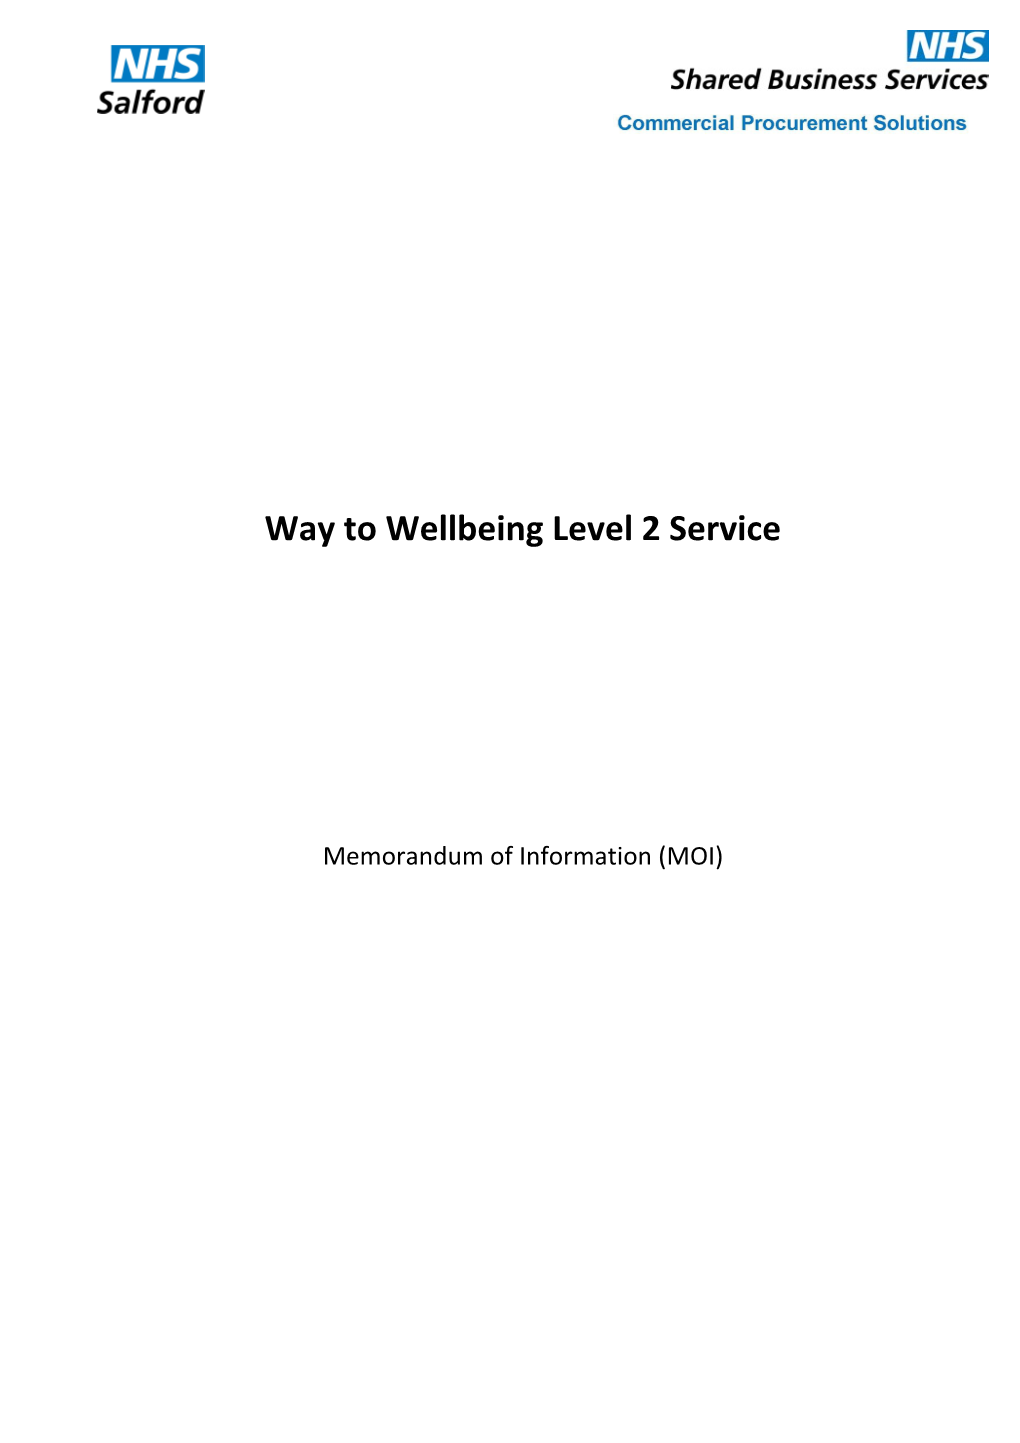 Way to Wellbeing Level 2 Service